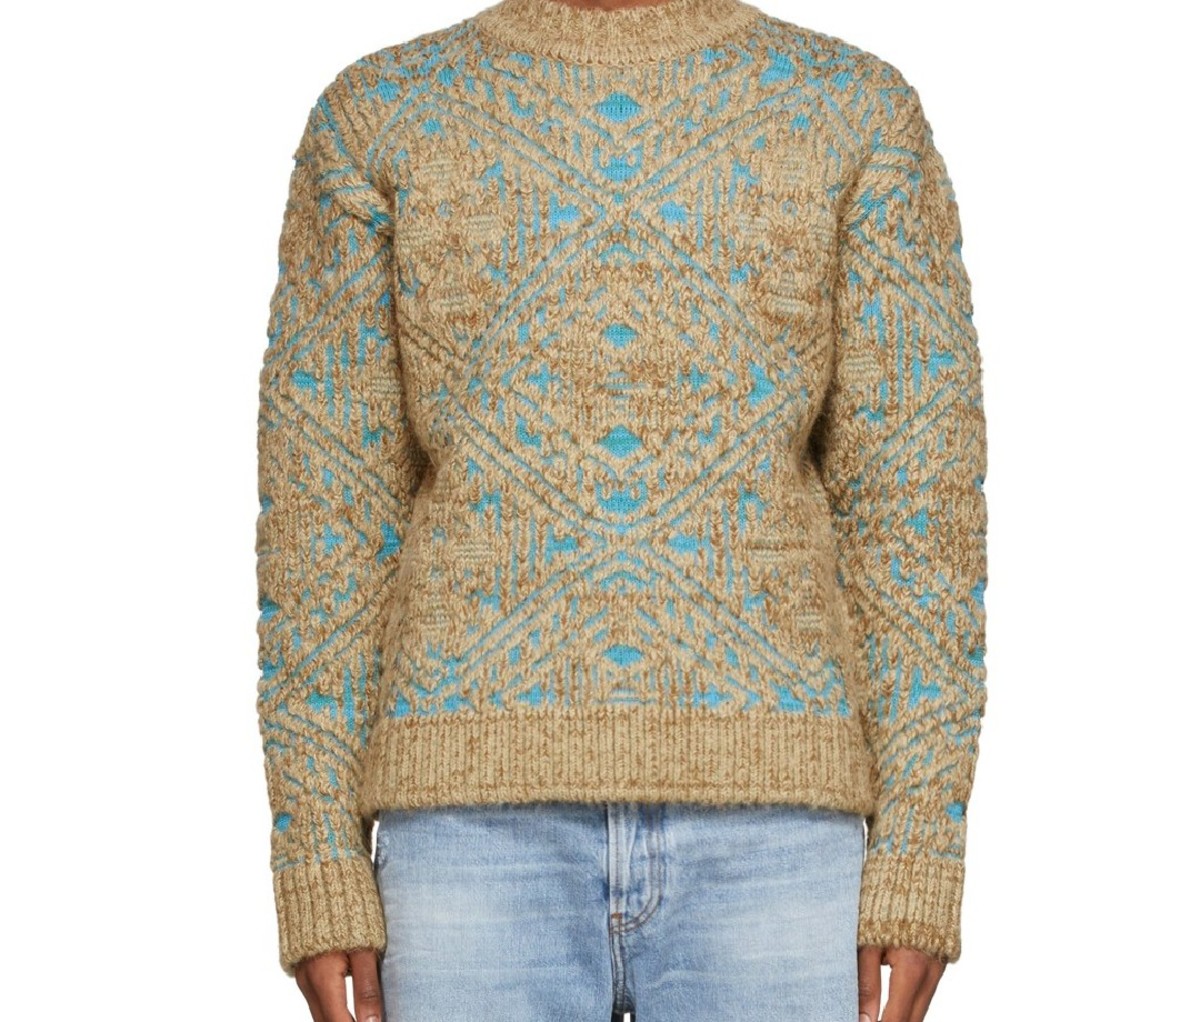 Beige and blue-ish Andersson Bell Beige & Blue Heavy Jacquard Sweater